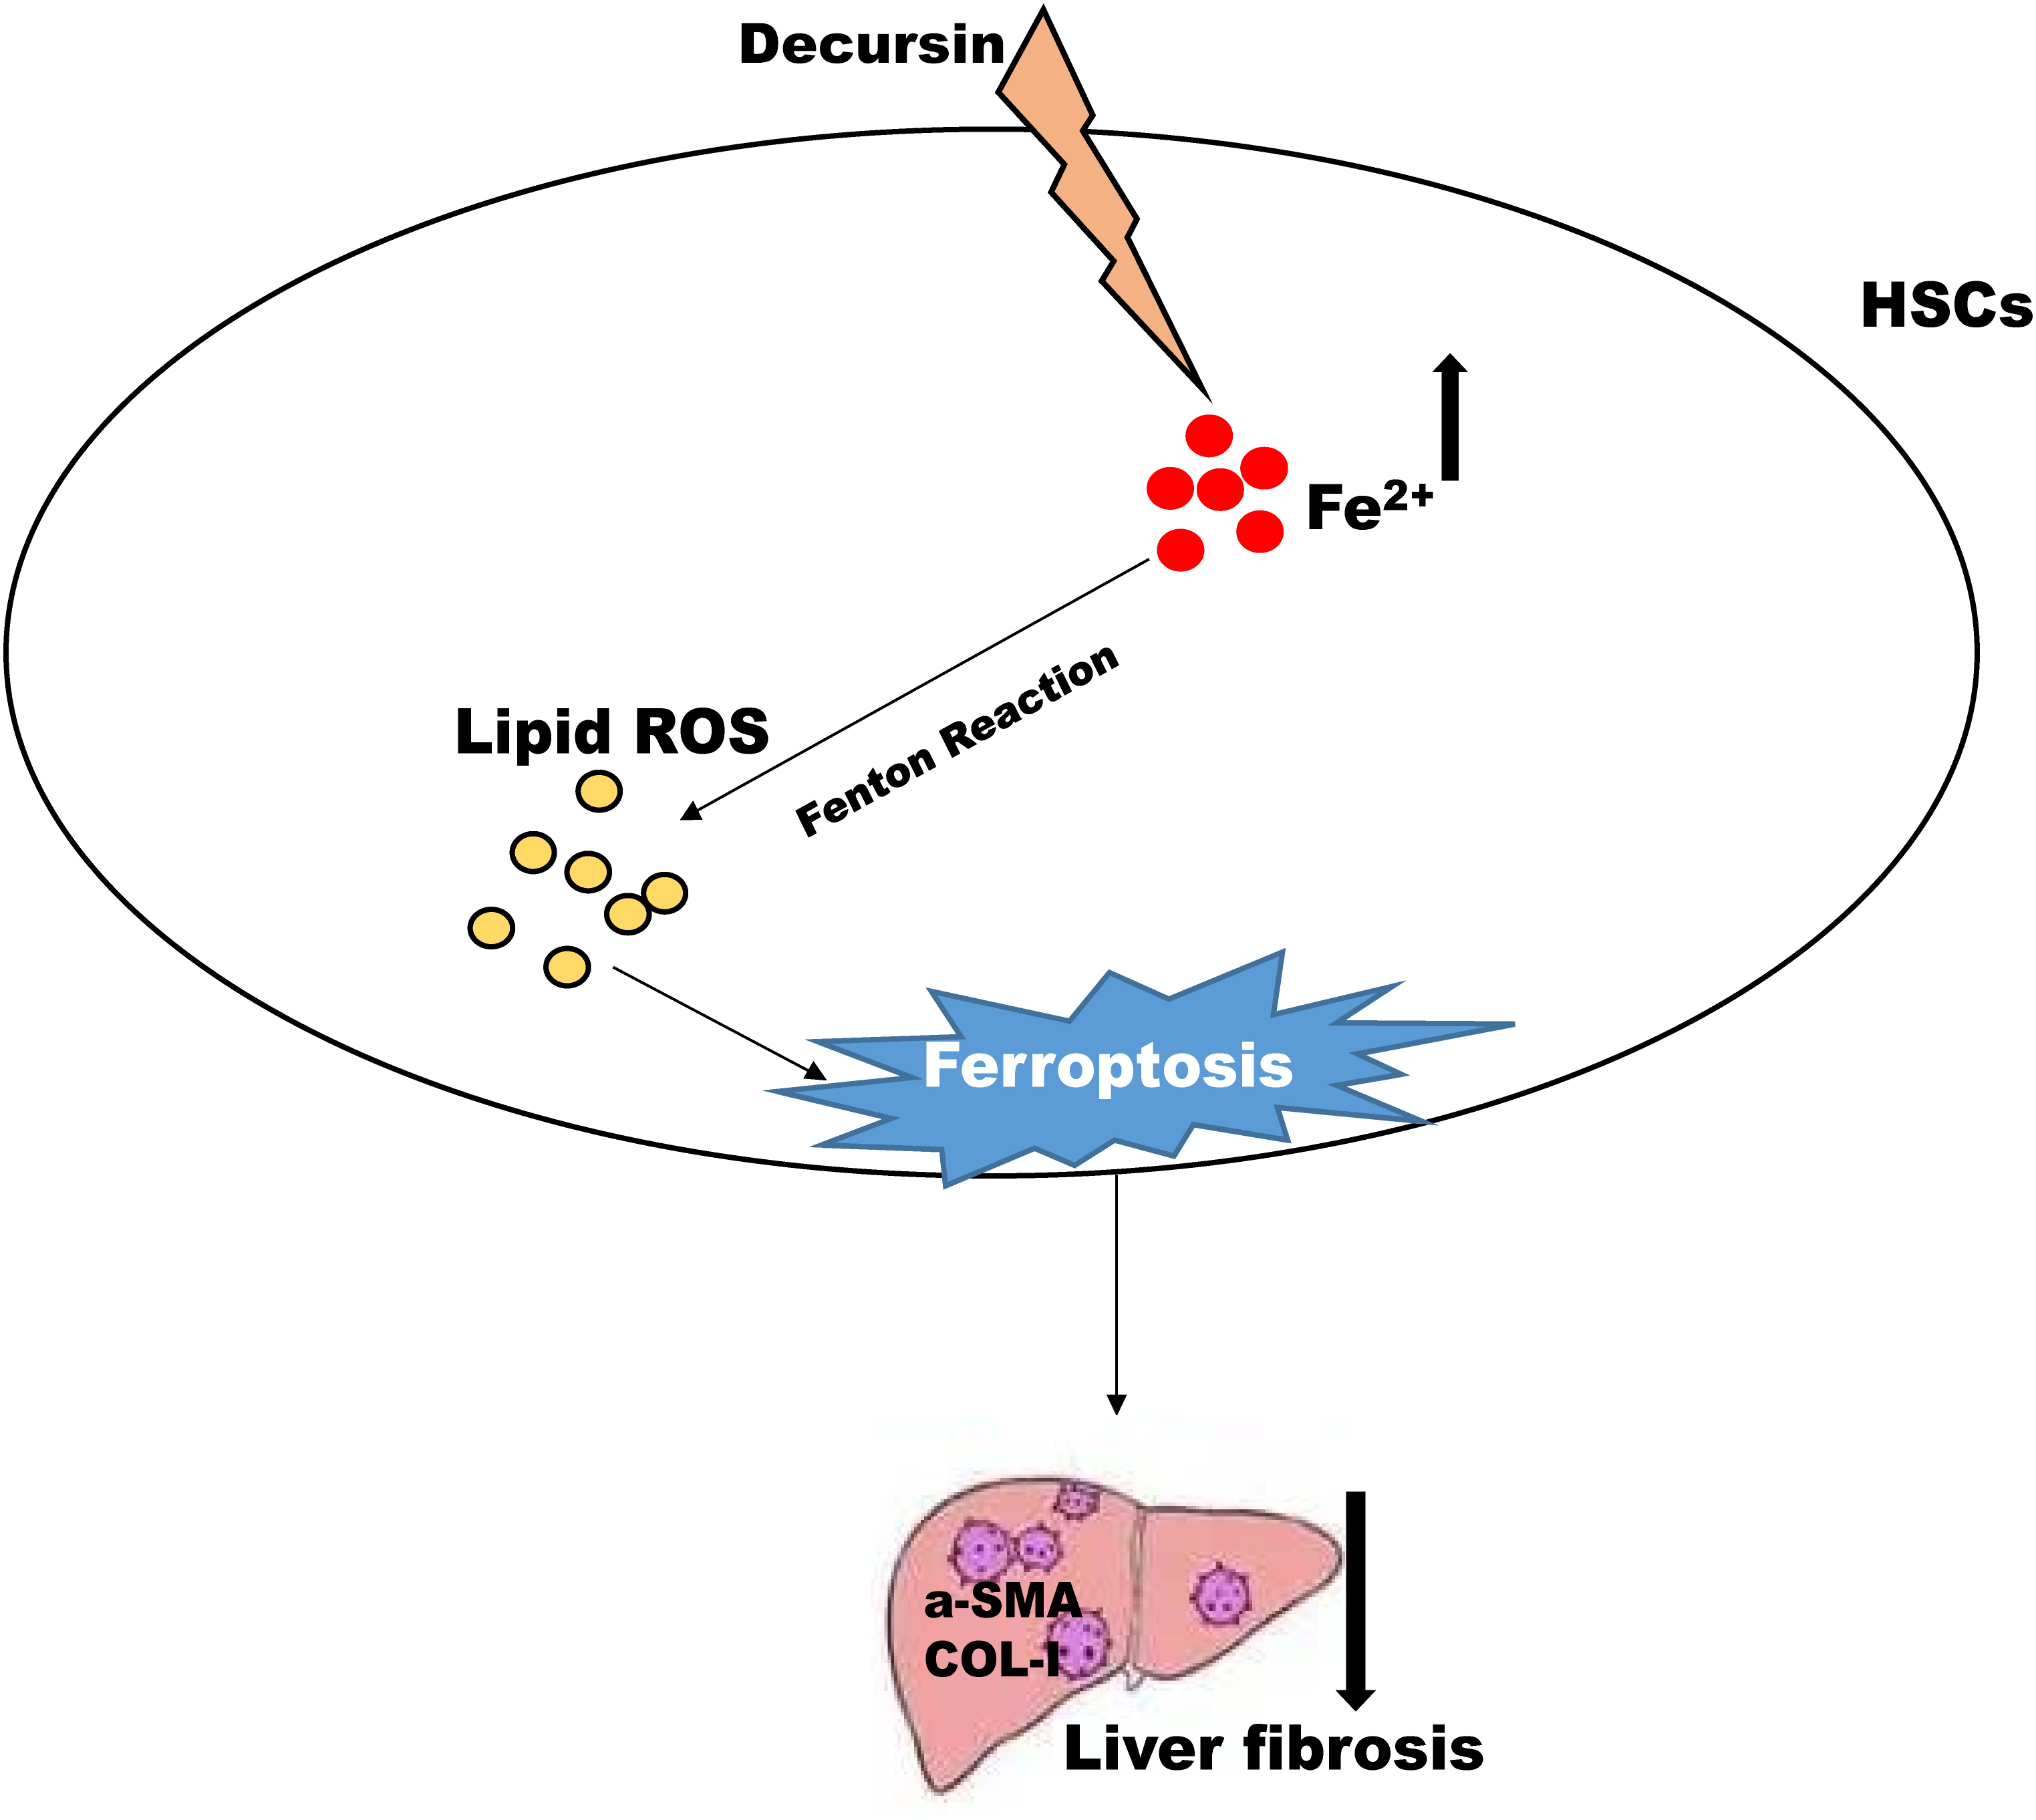 Decursin ameliorates carbon-tetrachloride-induced liver fibrosis by facilitating ferroptosis of hepatic stellate cells